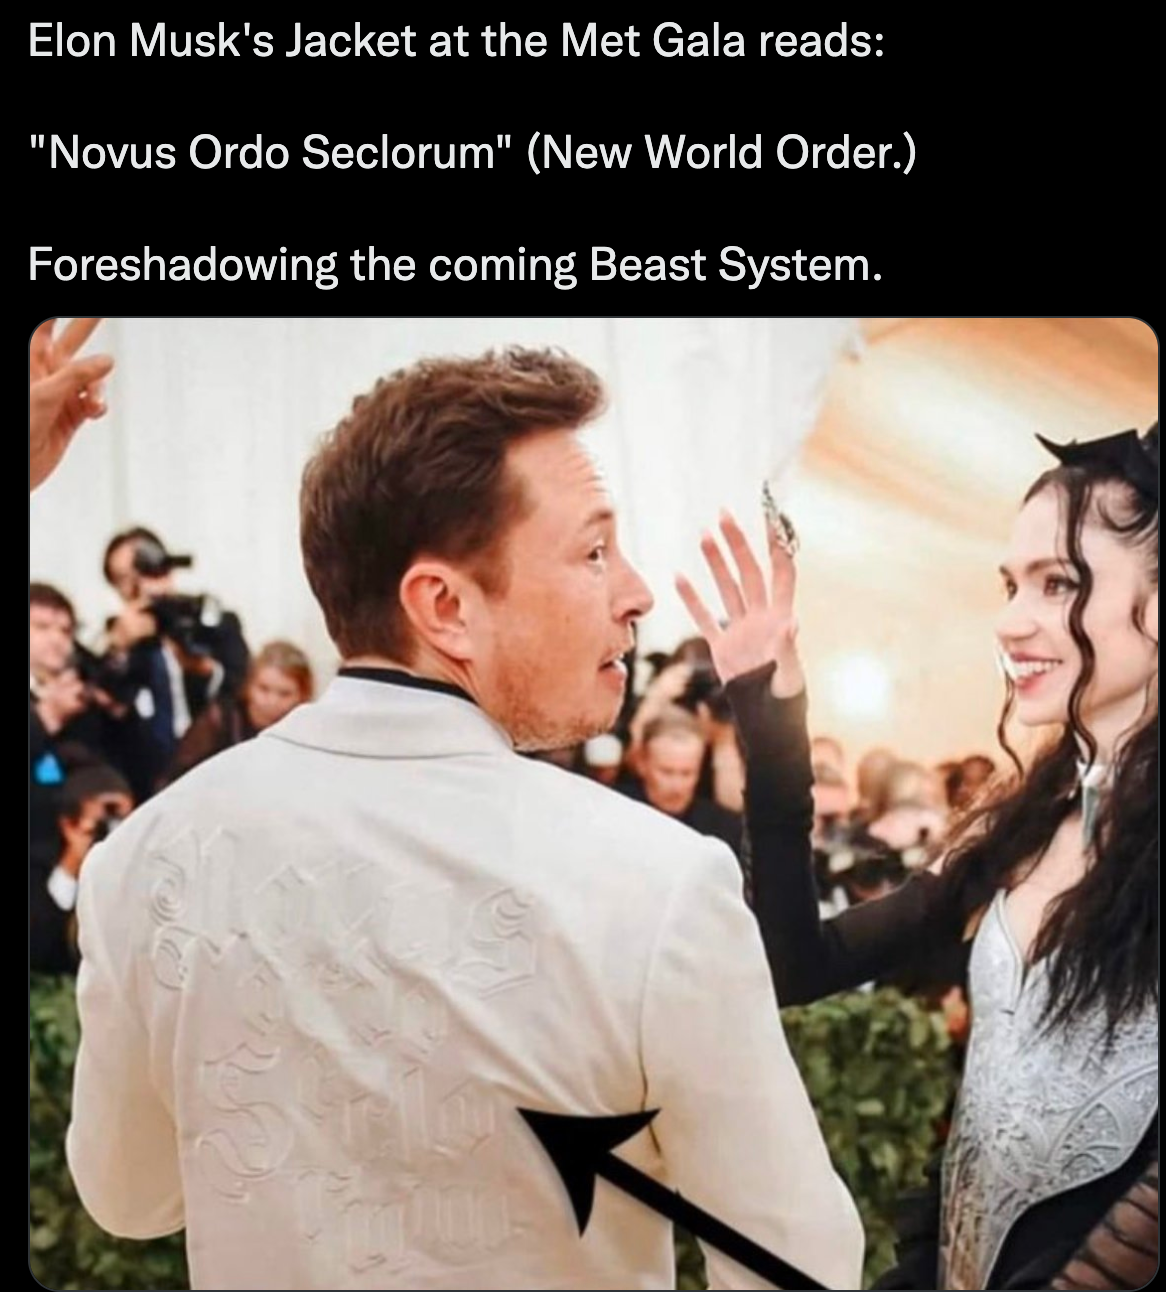 Elon Musk wears New World Order jacket at the Met Gala The Great